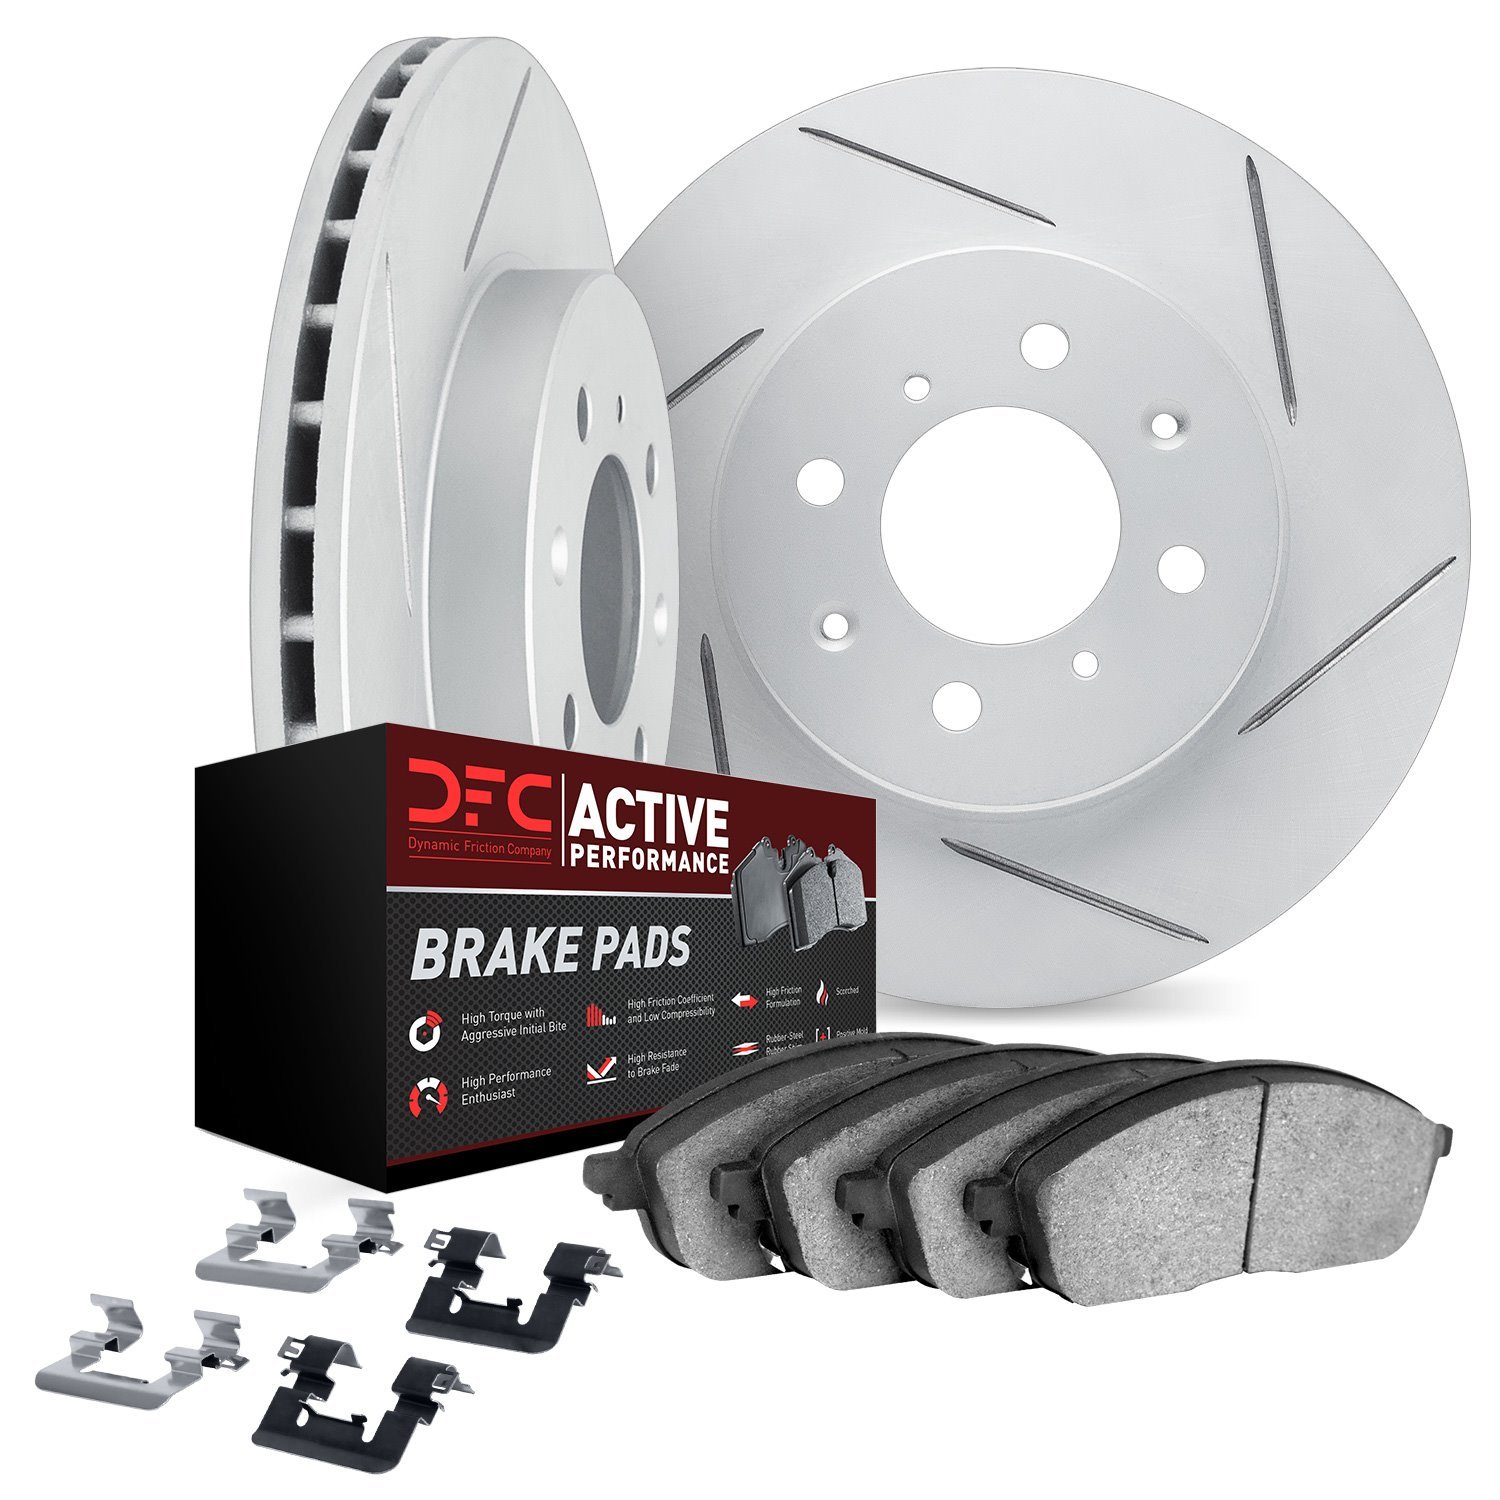 2712-54069 Geoperformance Slotted Brake Rotors with Active Performance Pads Kits & Hardware, 2014-2019 Ford/Lincoln/Mercury/Mazd